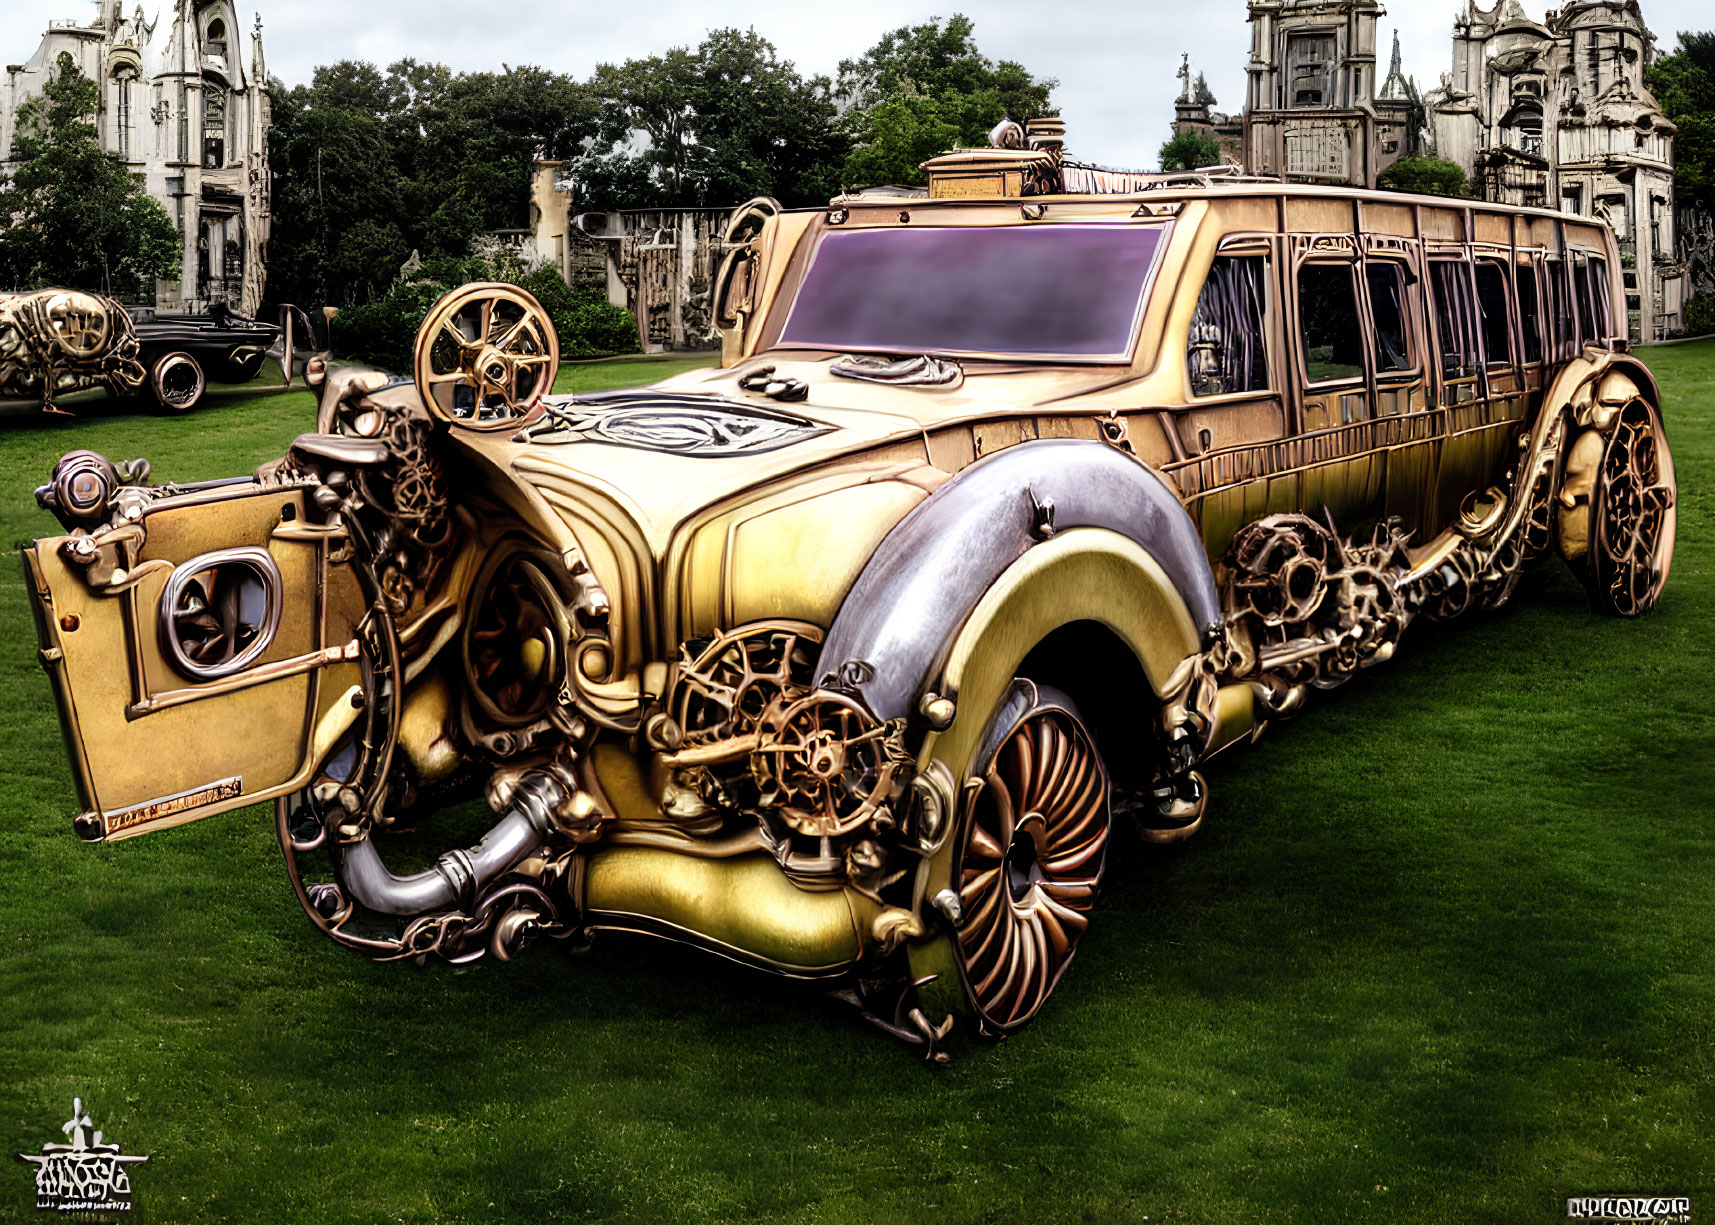 Steampunk-style ornate limousine with vintage gears and greenery.